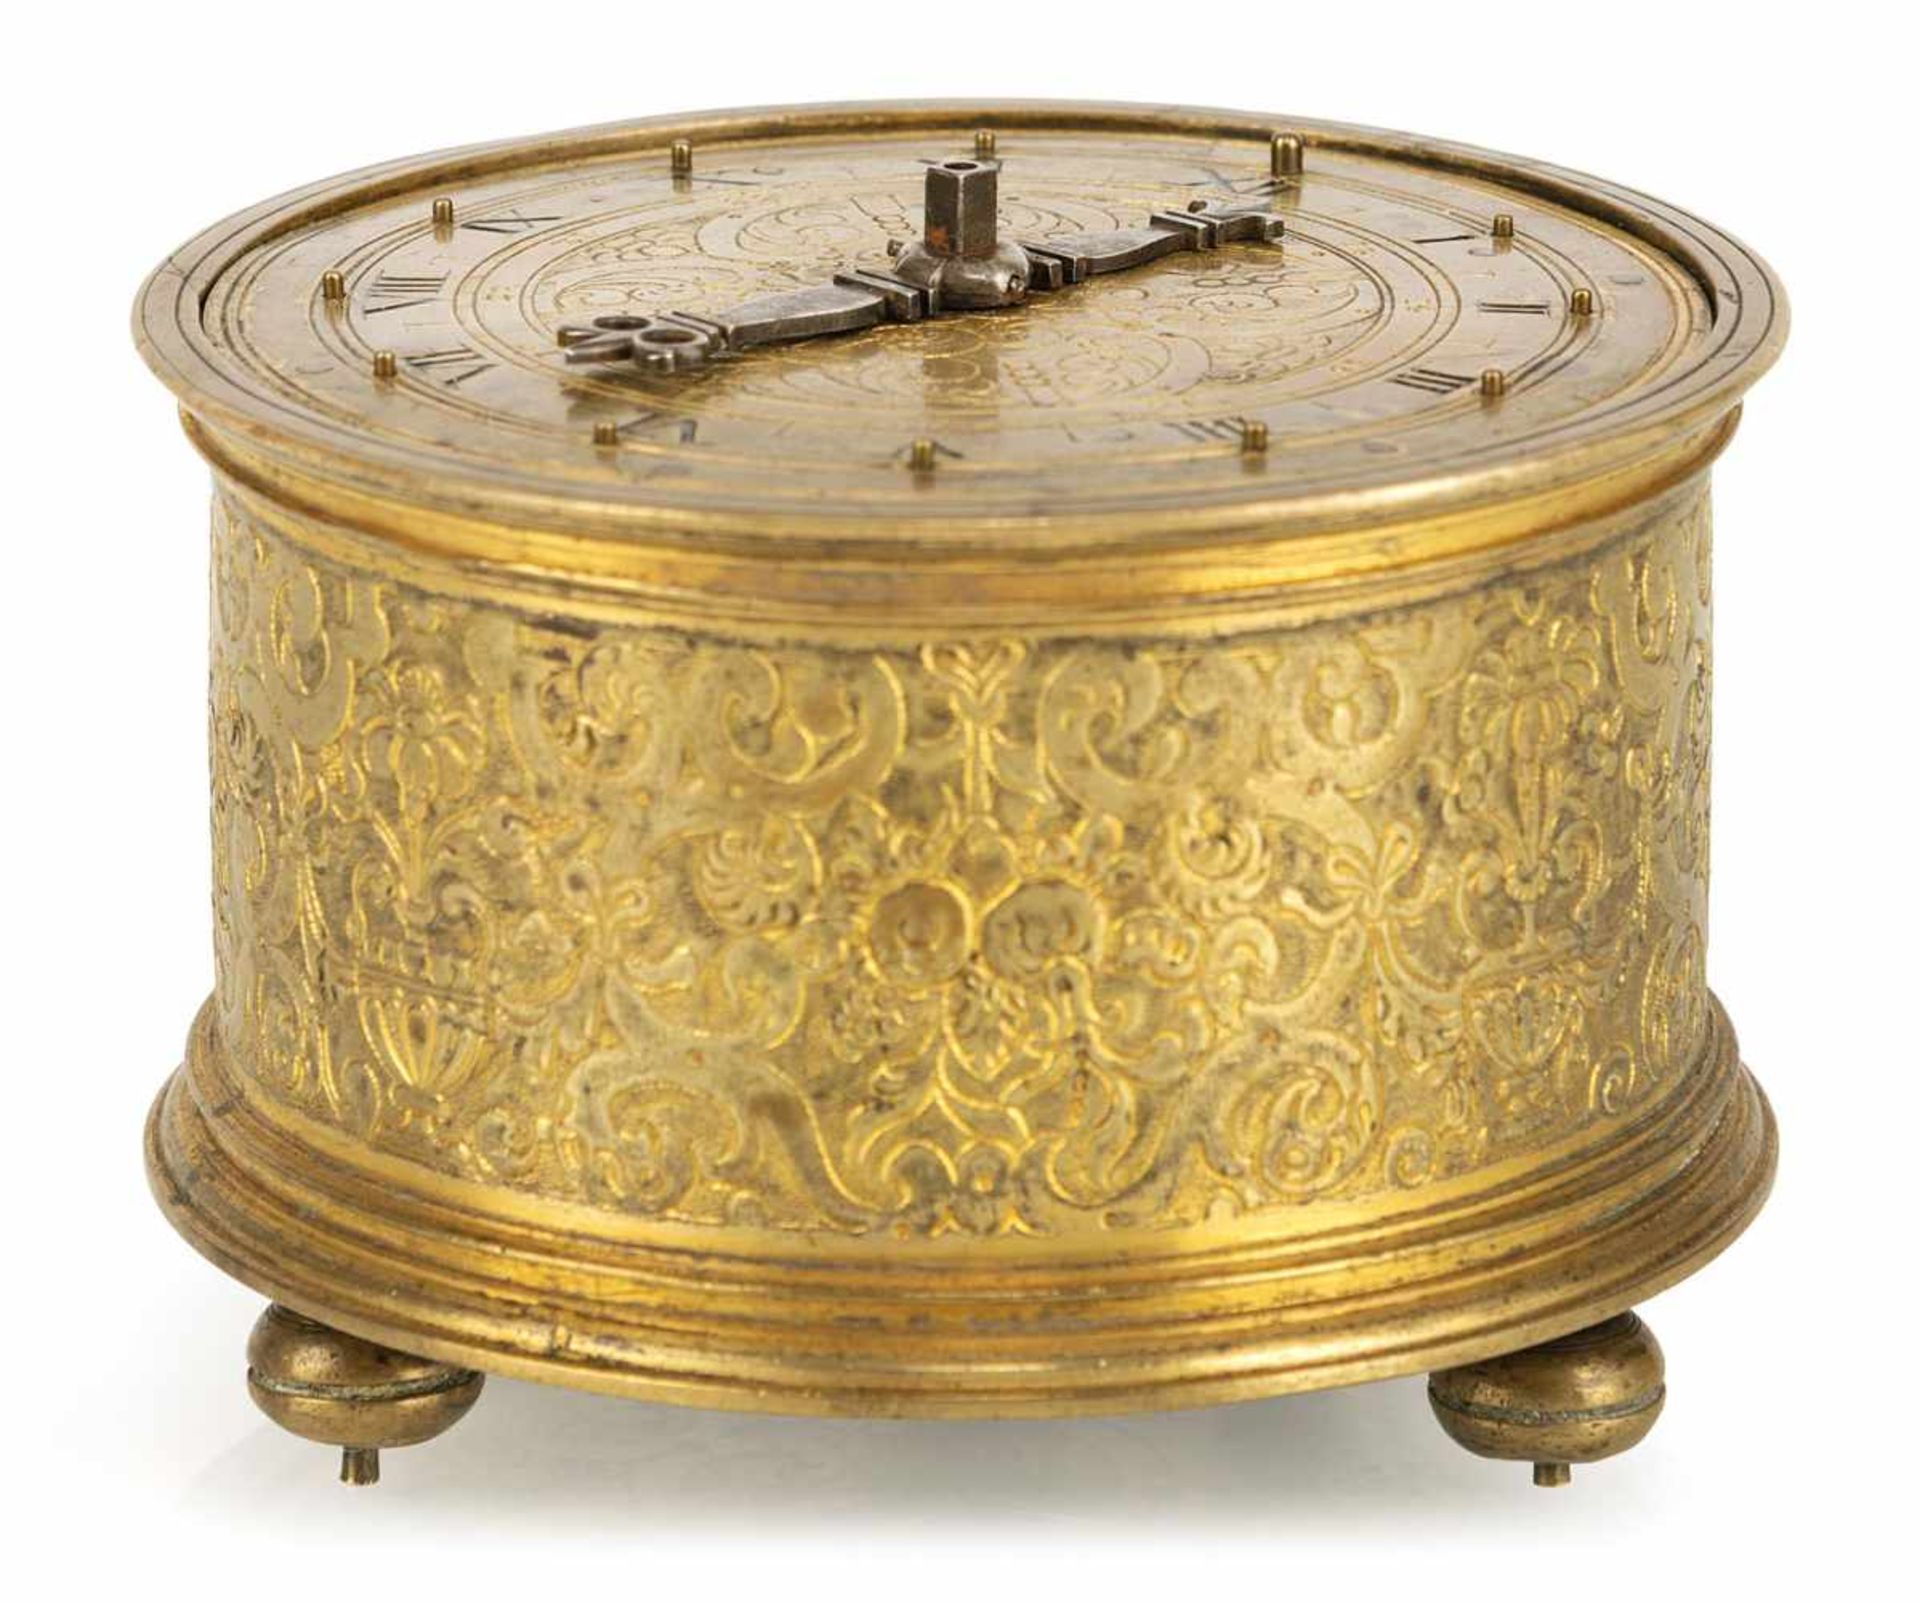 A round fire-gilt table clock, stamped NS ( Nikolaus Schmidt Augsburg ?), c. 1620. Engraved and